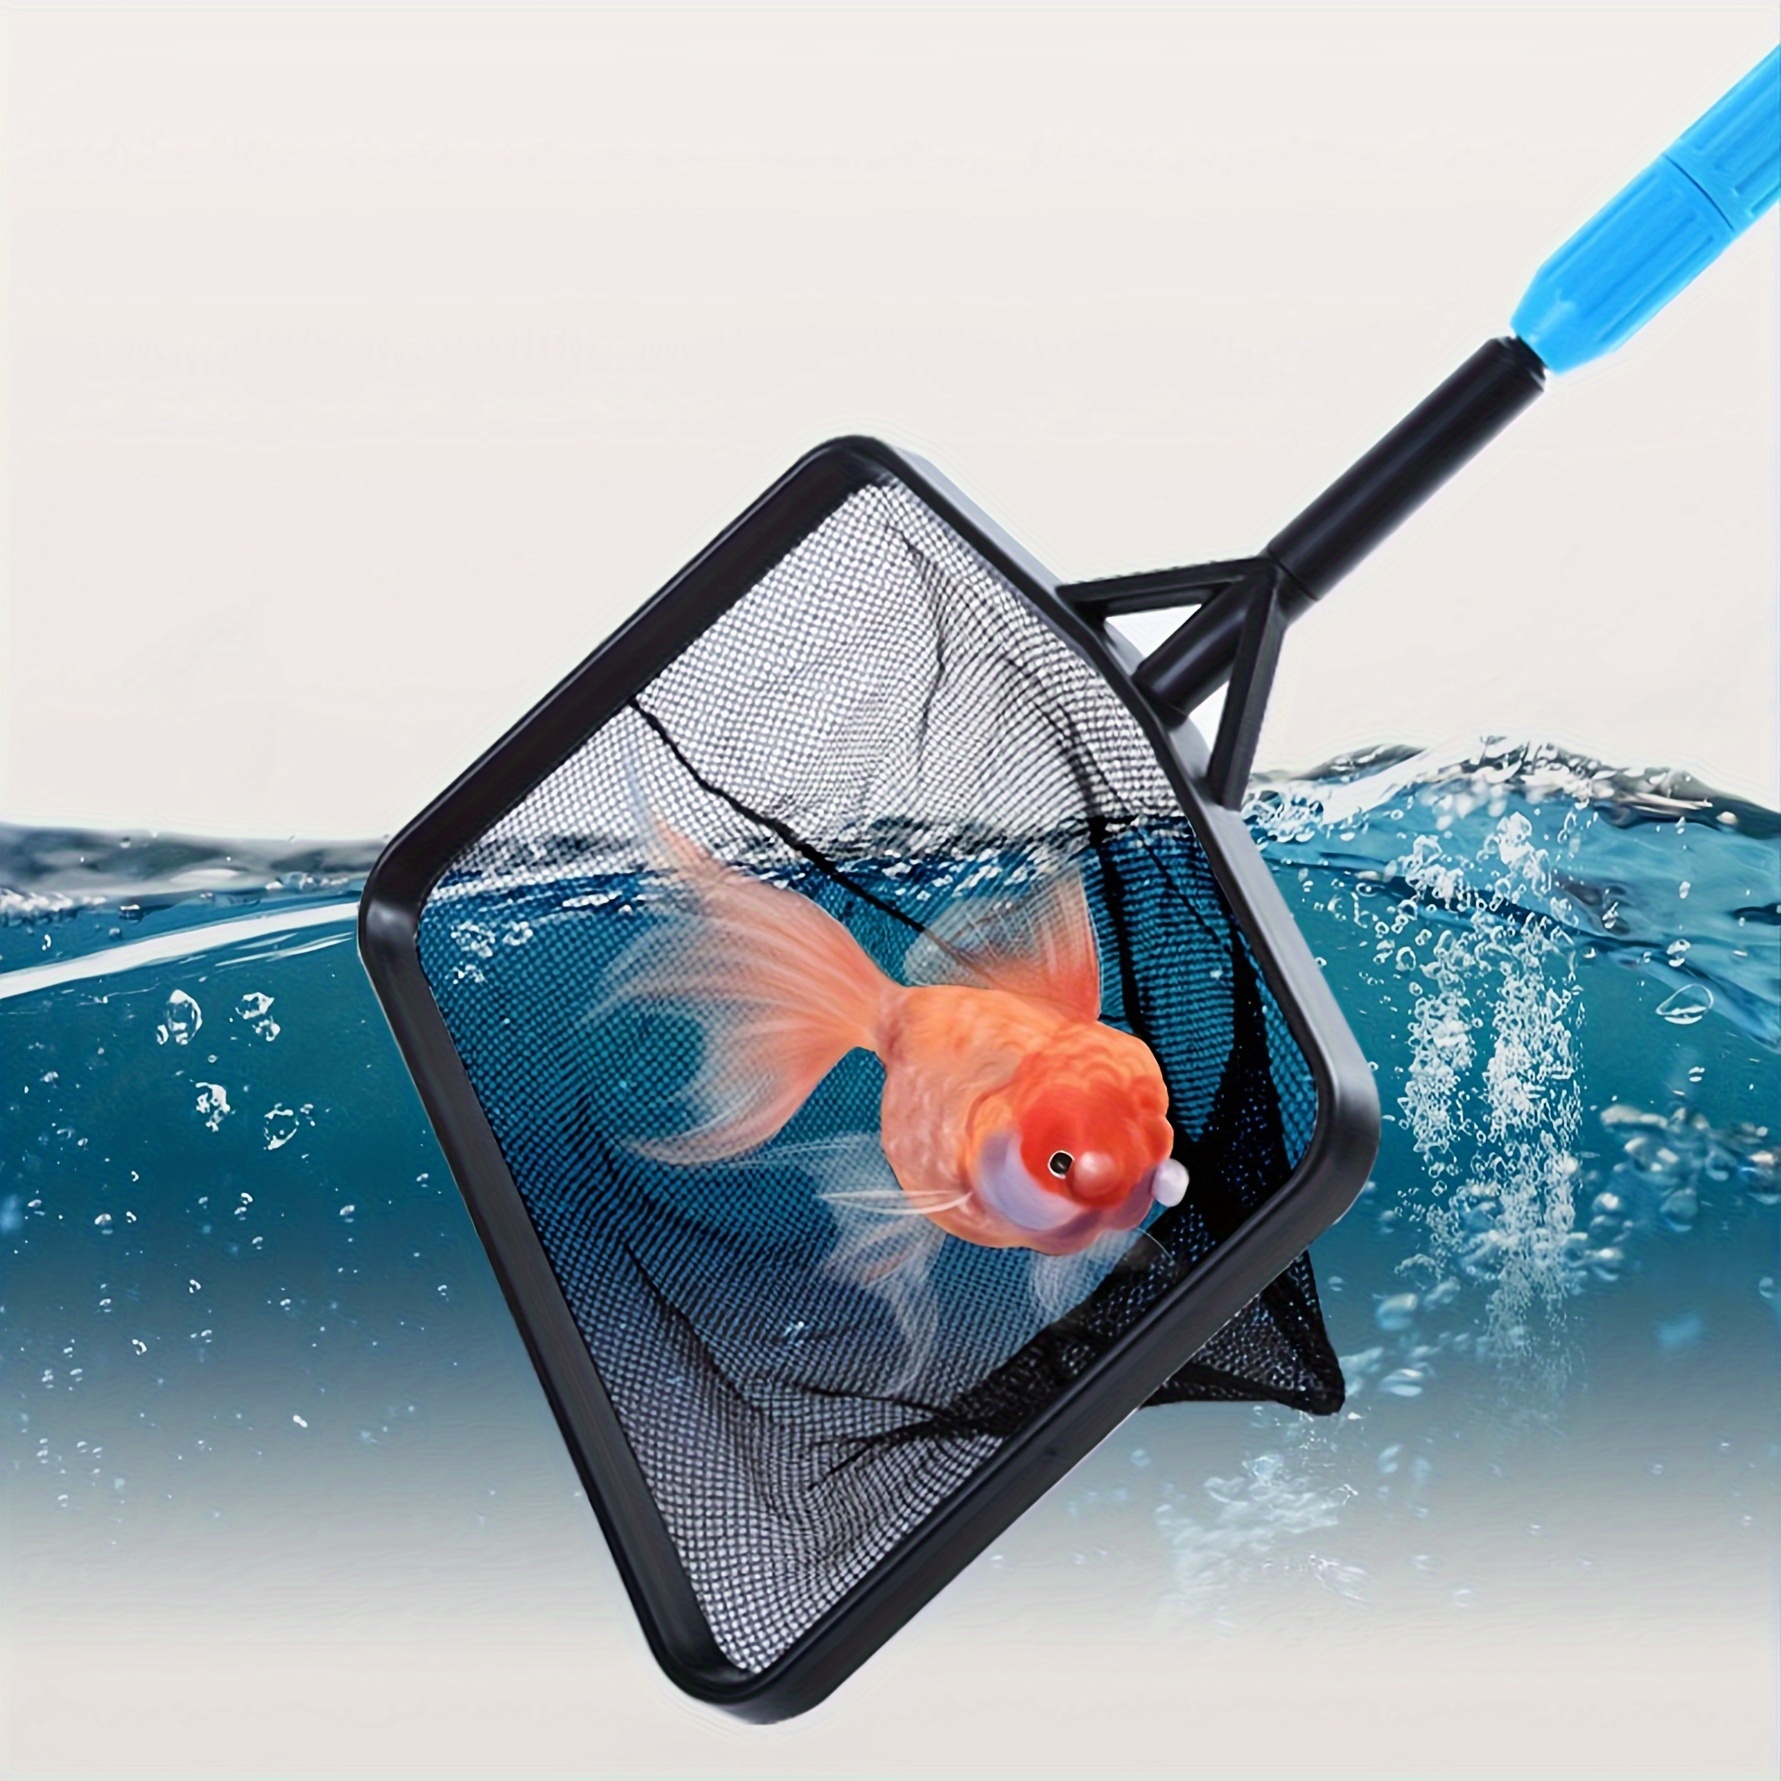 

1pc, Telescopic Fish Net, Durable & Flexible Aquarium Fish Catching Mesh, Extendable Handle, Strong Pond Fishing Net With Deep Pocket For Home & Outdoor Use